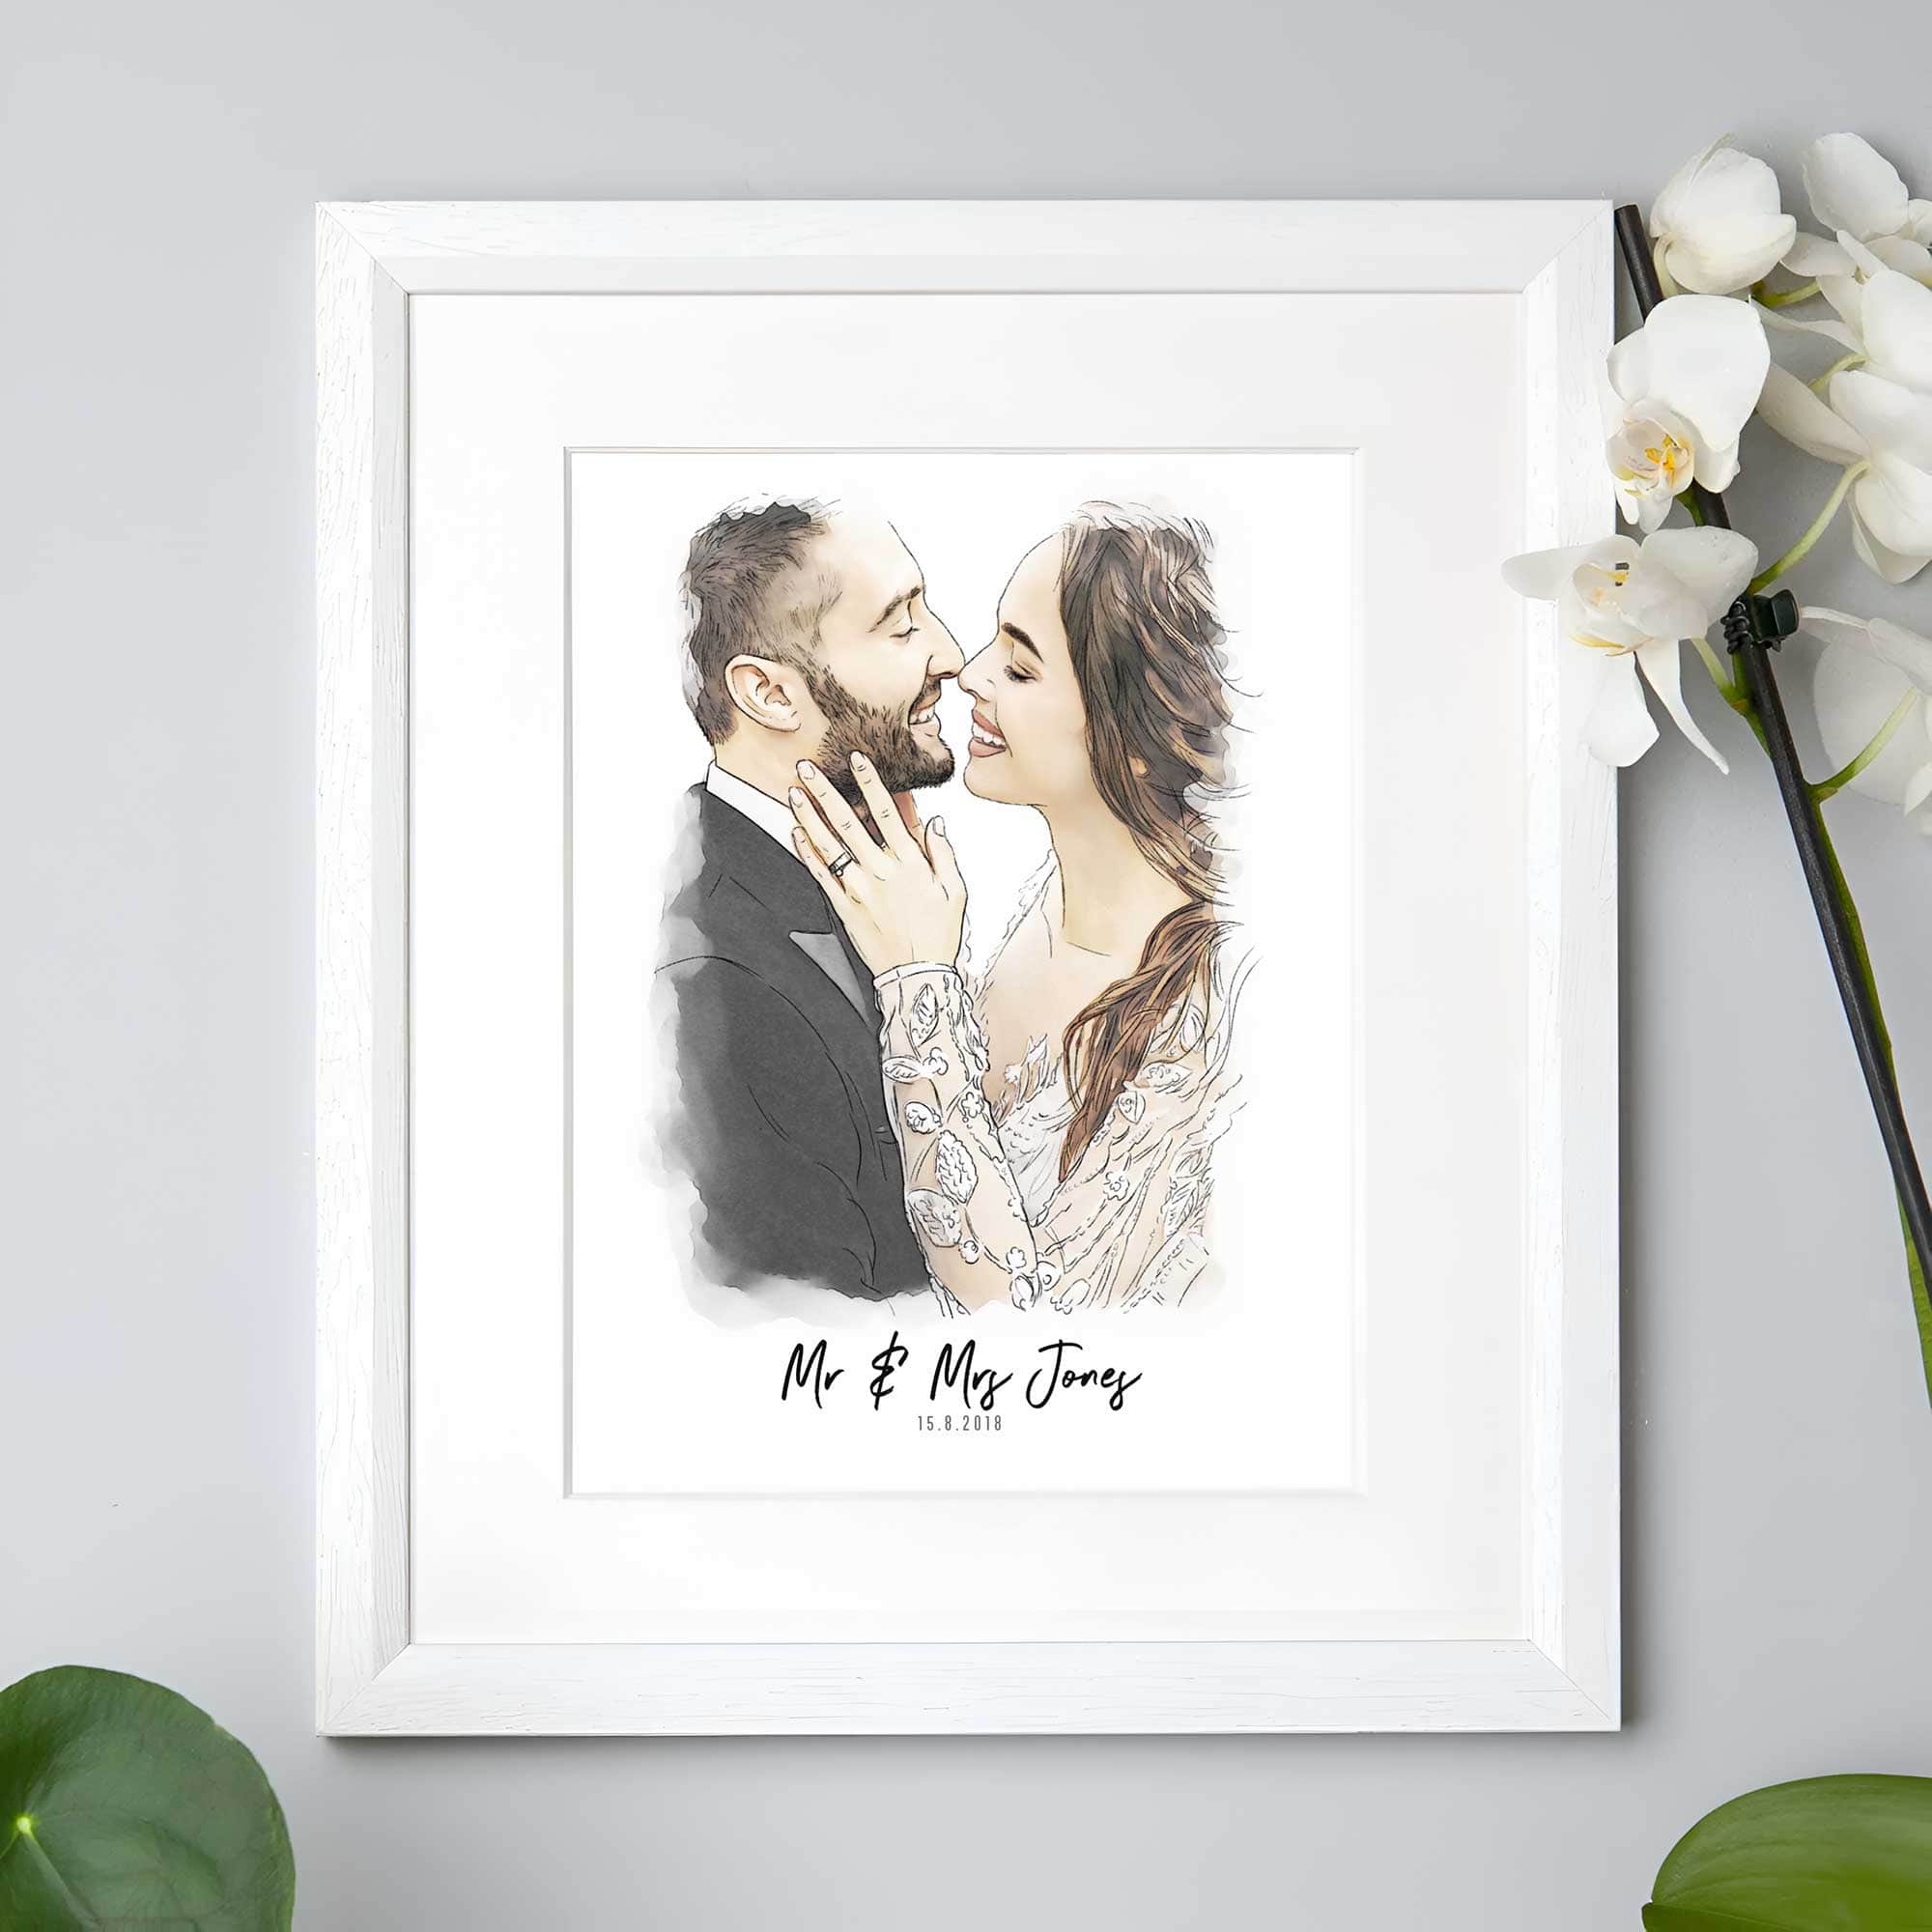 Personalised wedding venue illustration | Gift for bride and groom